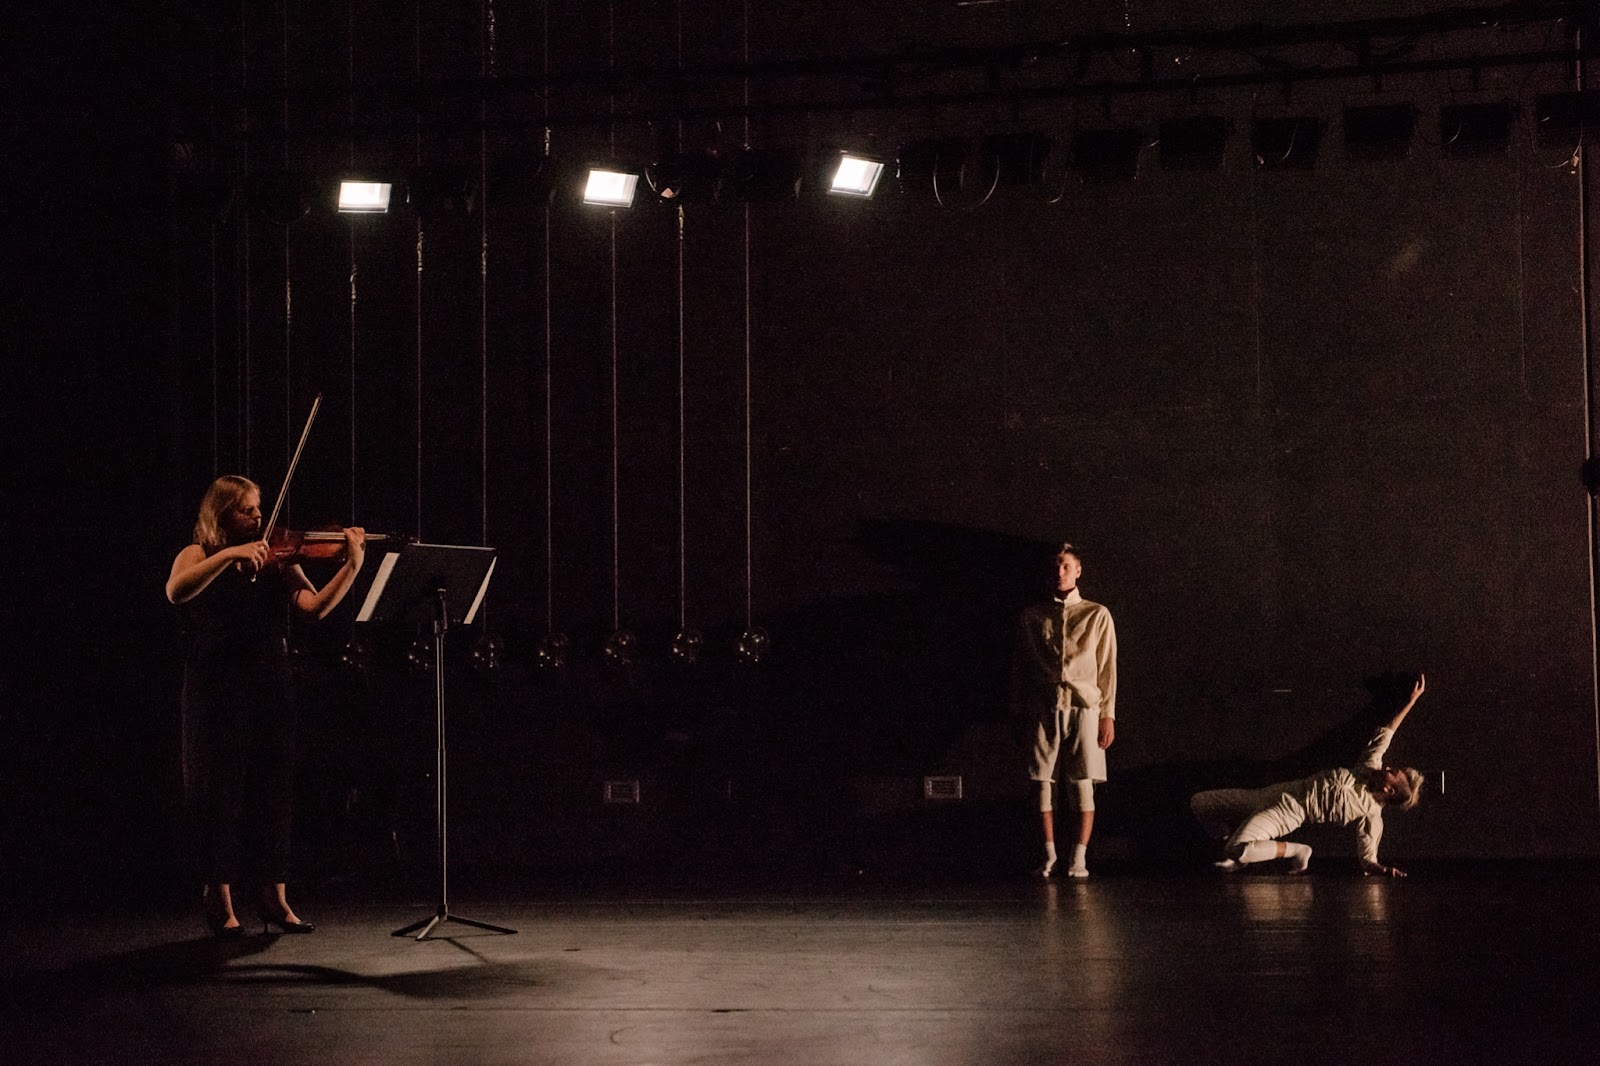 On a darkly lit dance stage, a violist plays on the left while two students dance on the right.